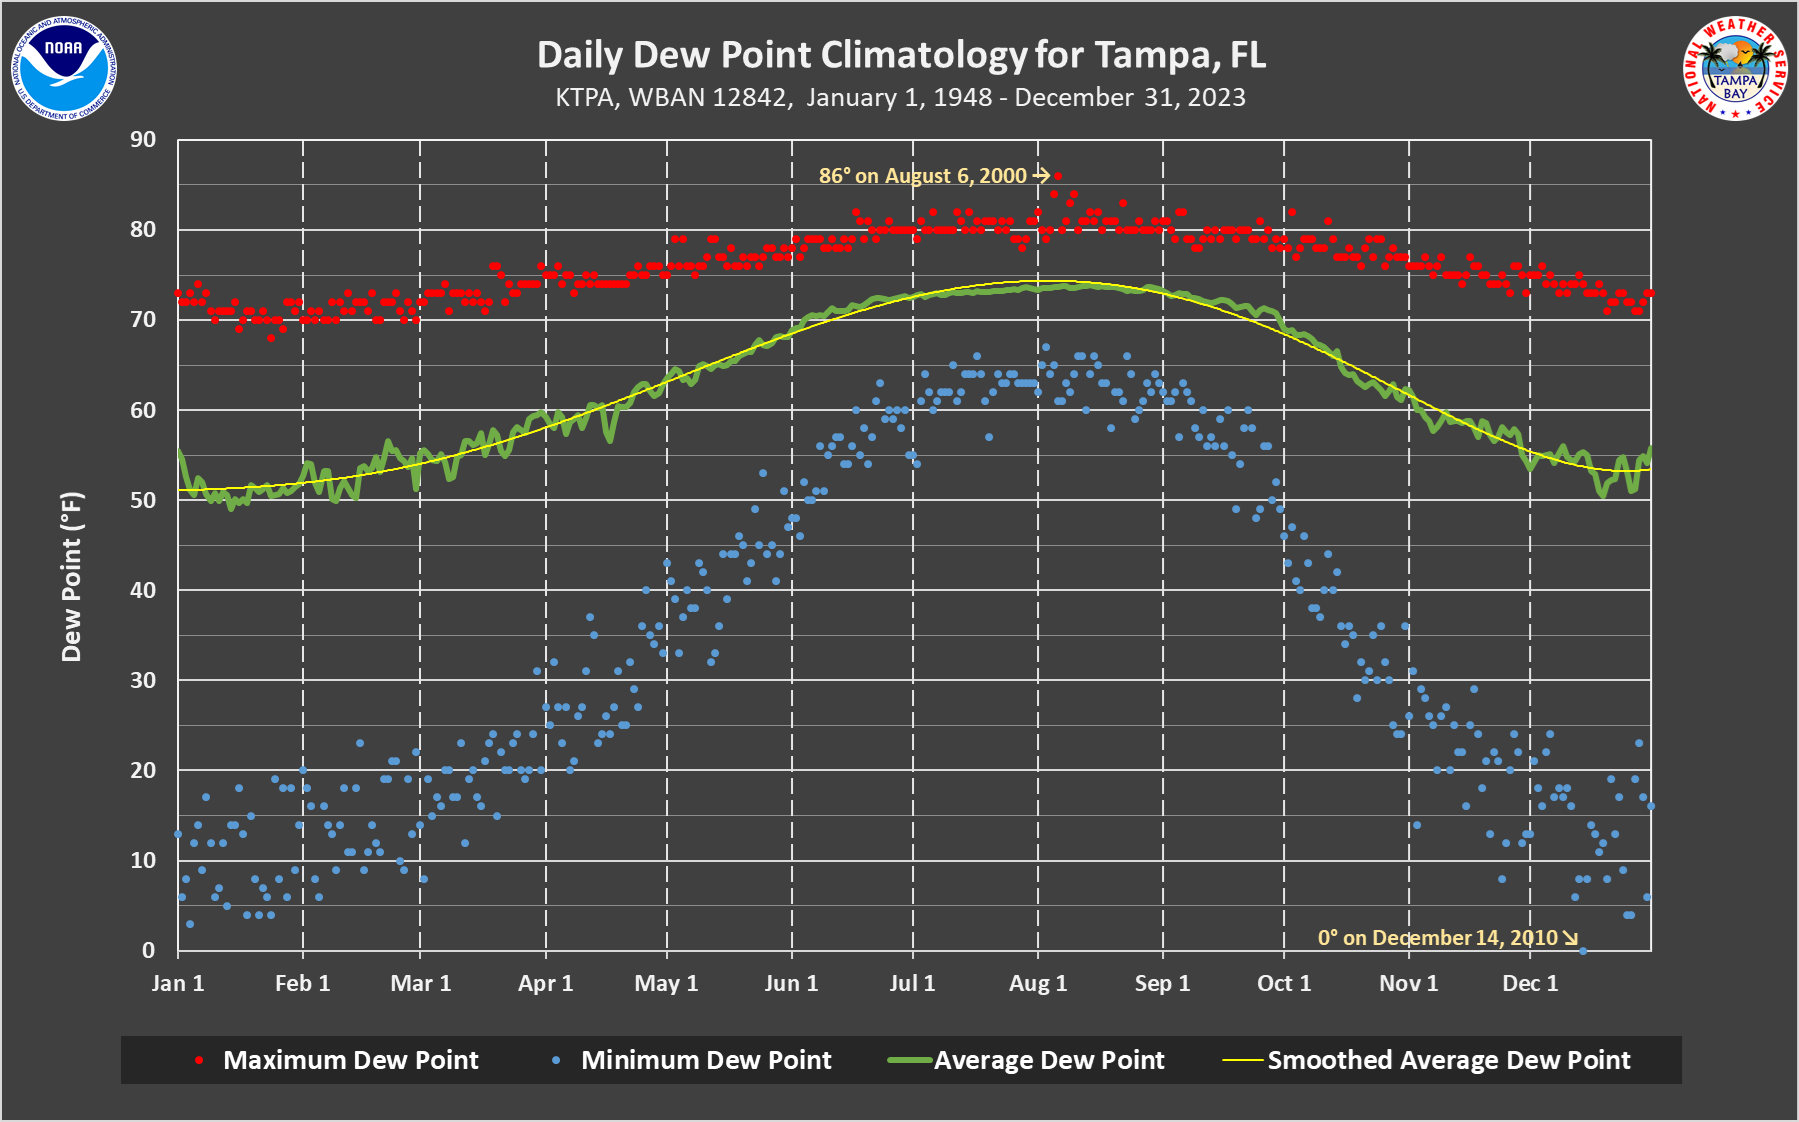 Daily Dew Point Climatology graph for Tampa, FL